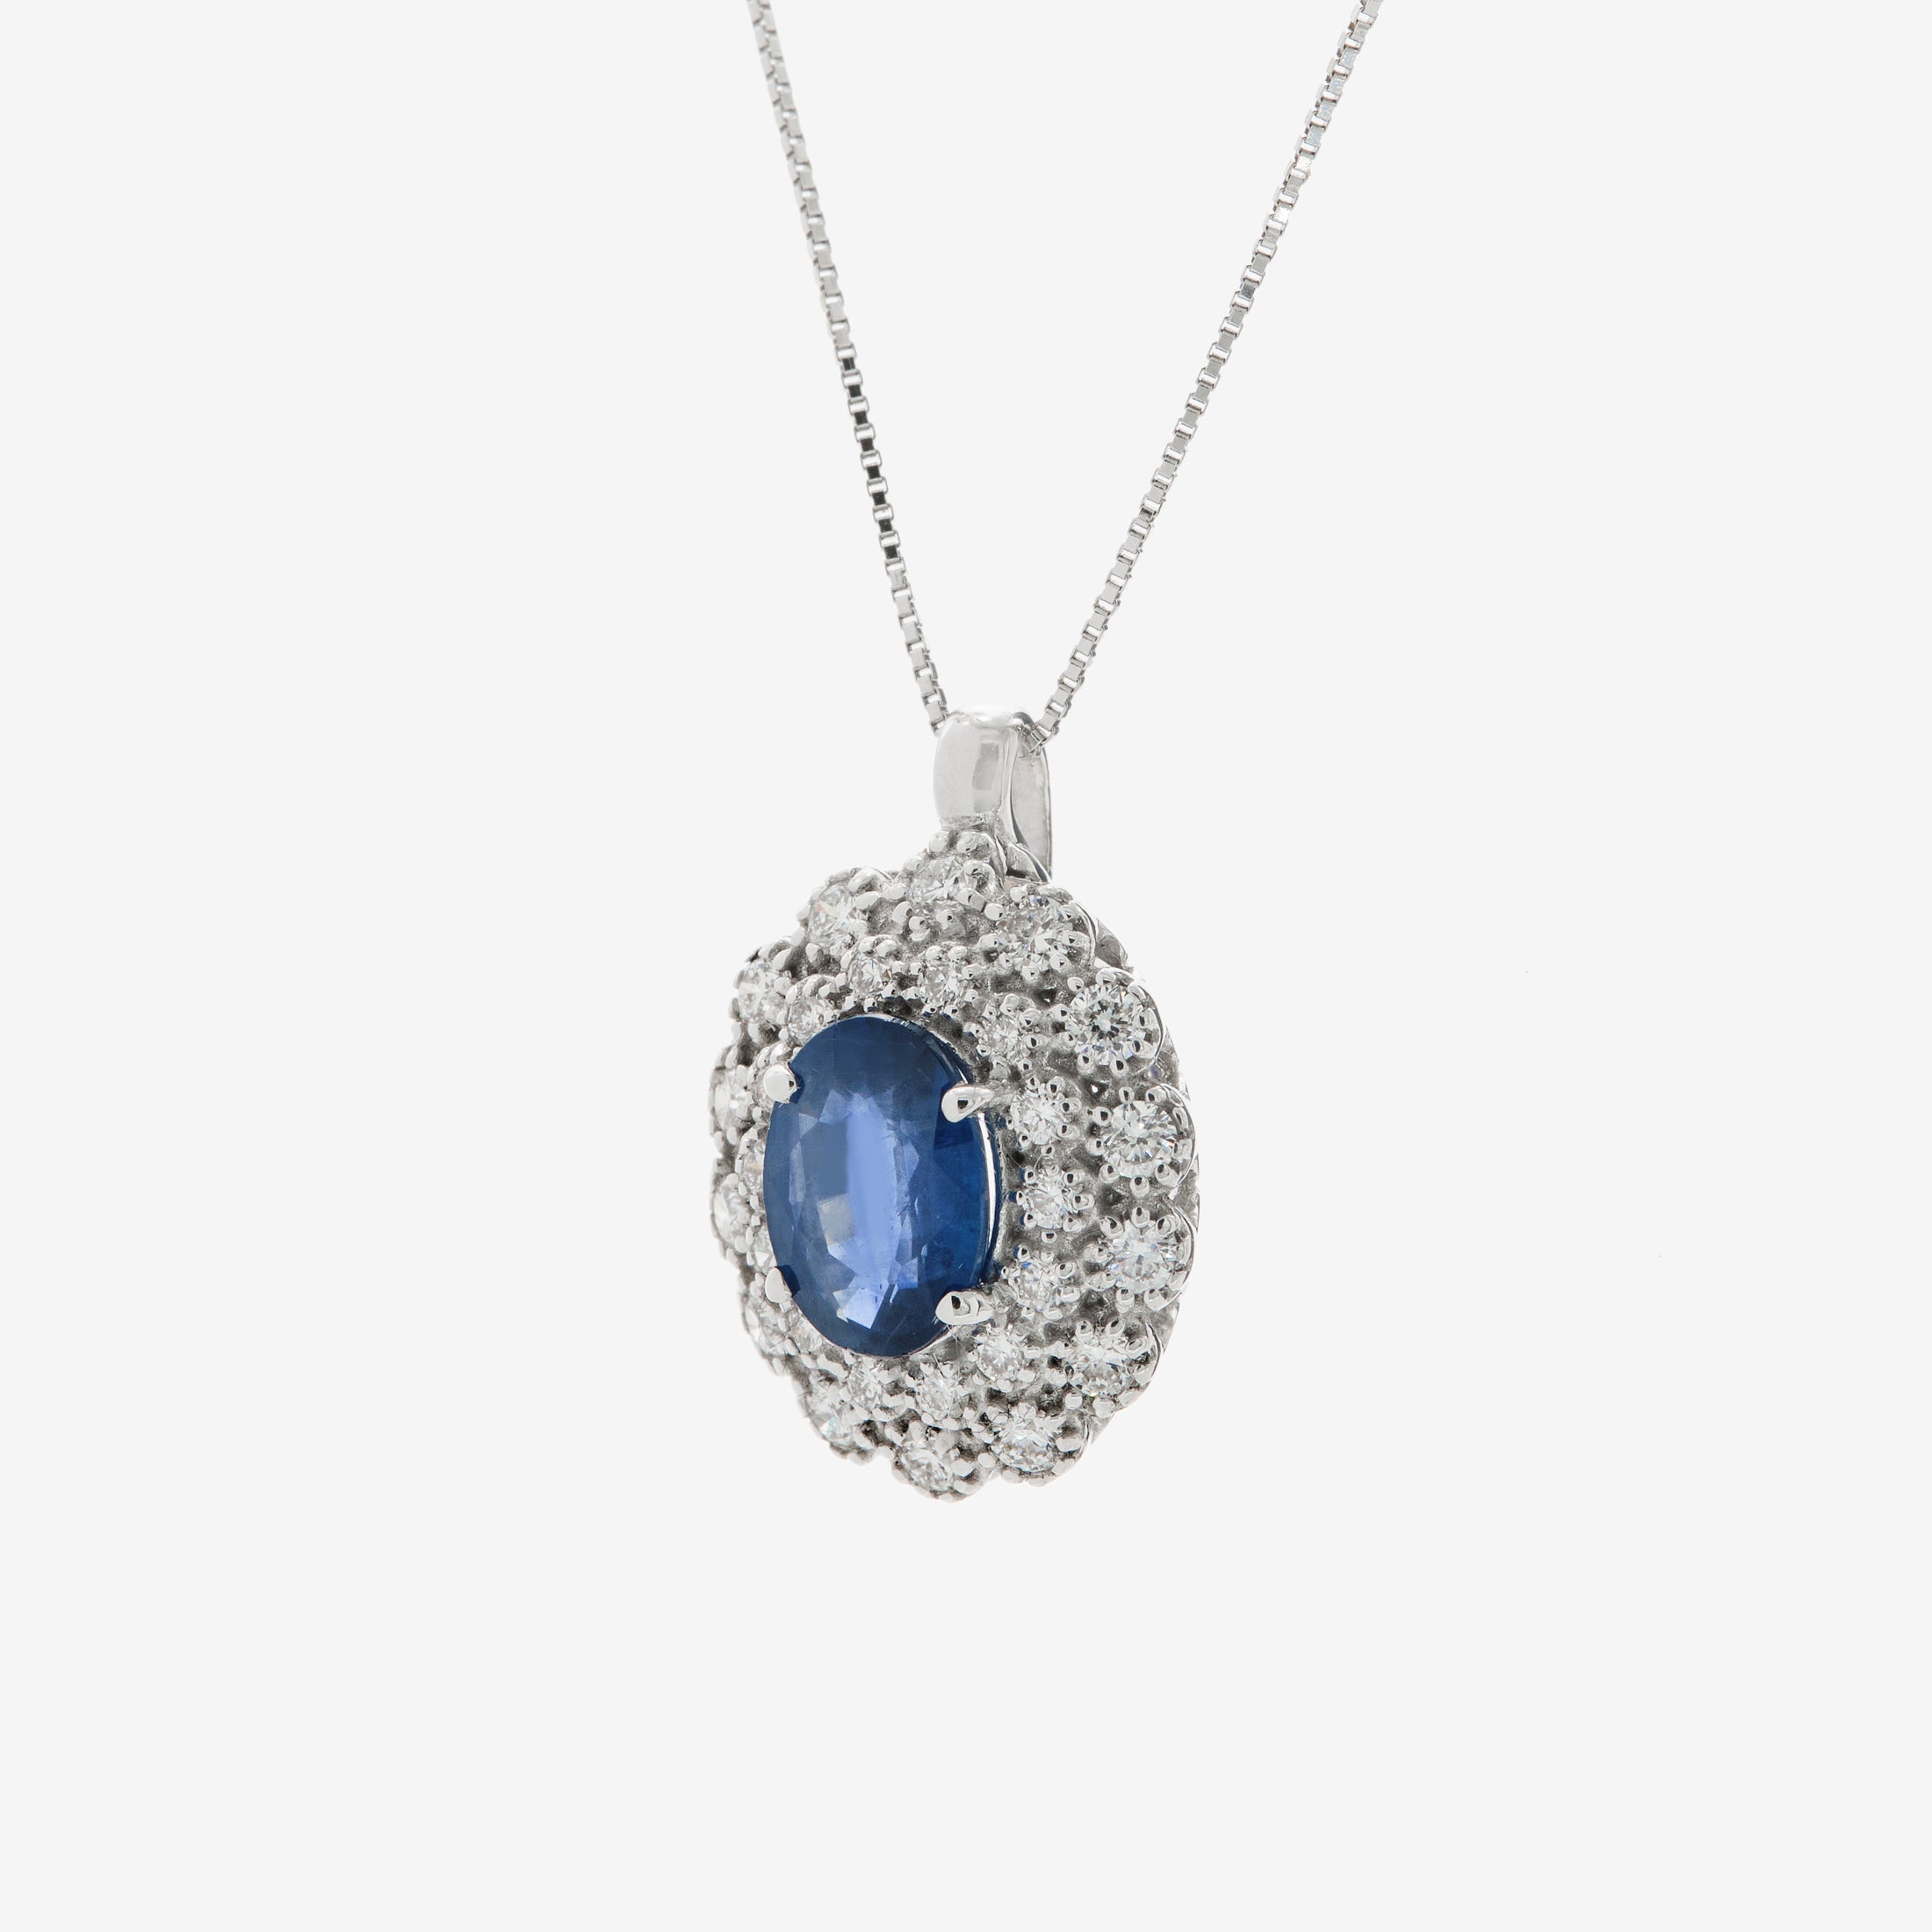 Julio necklace with sapphire and diamonds